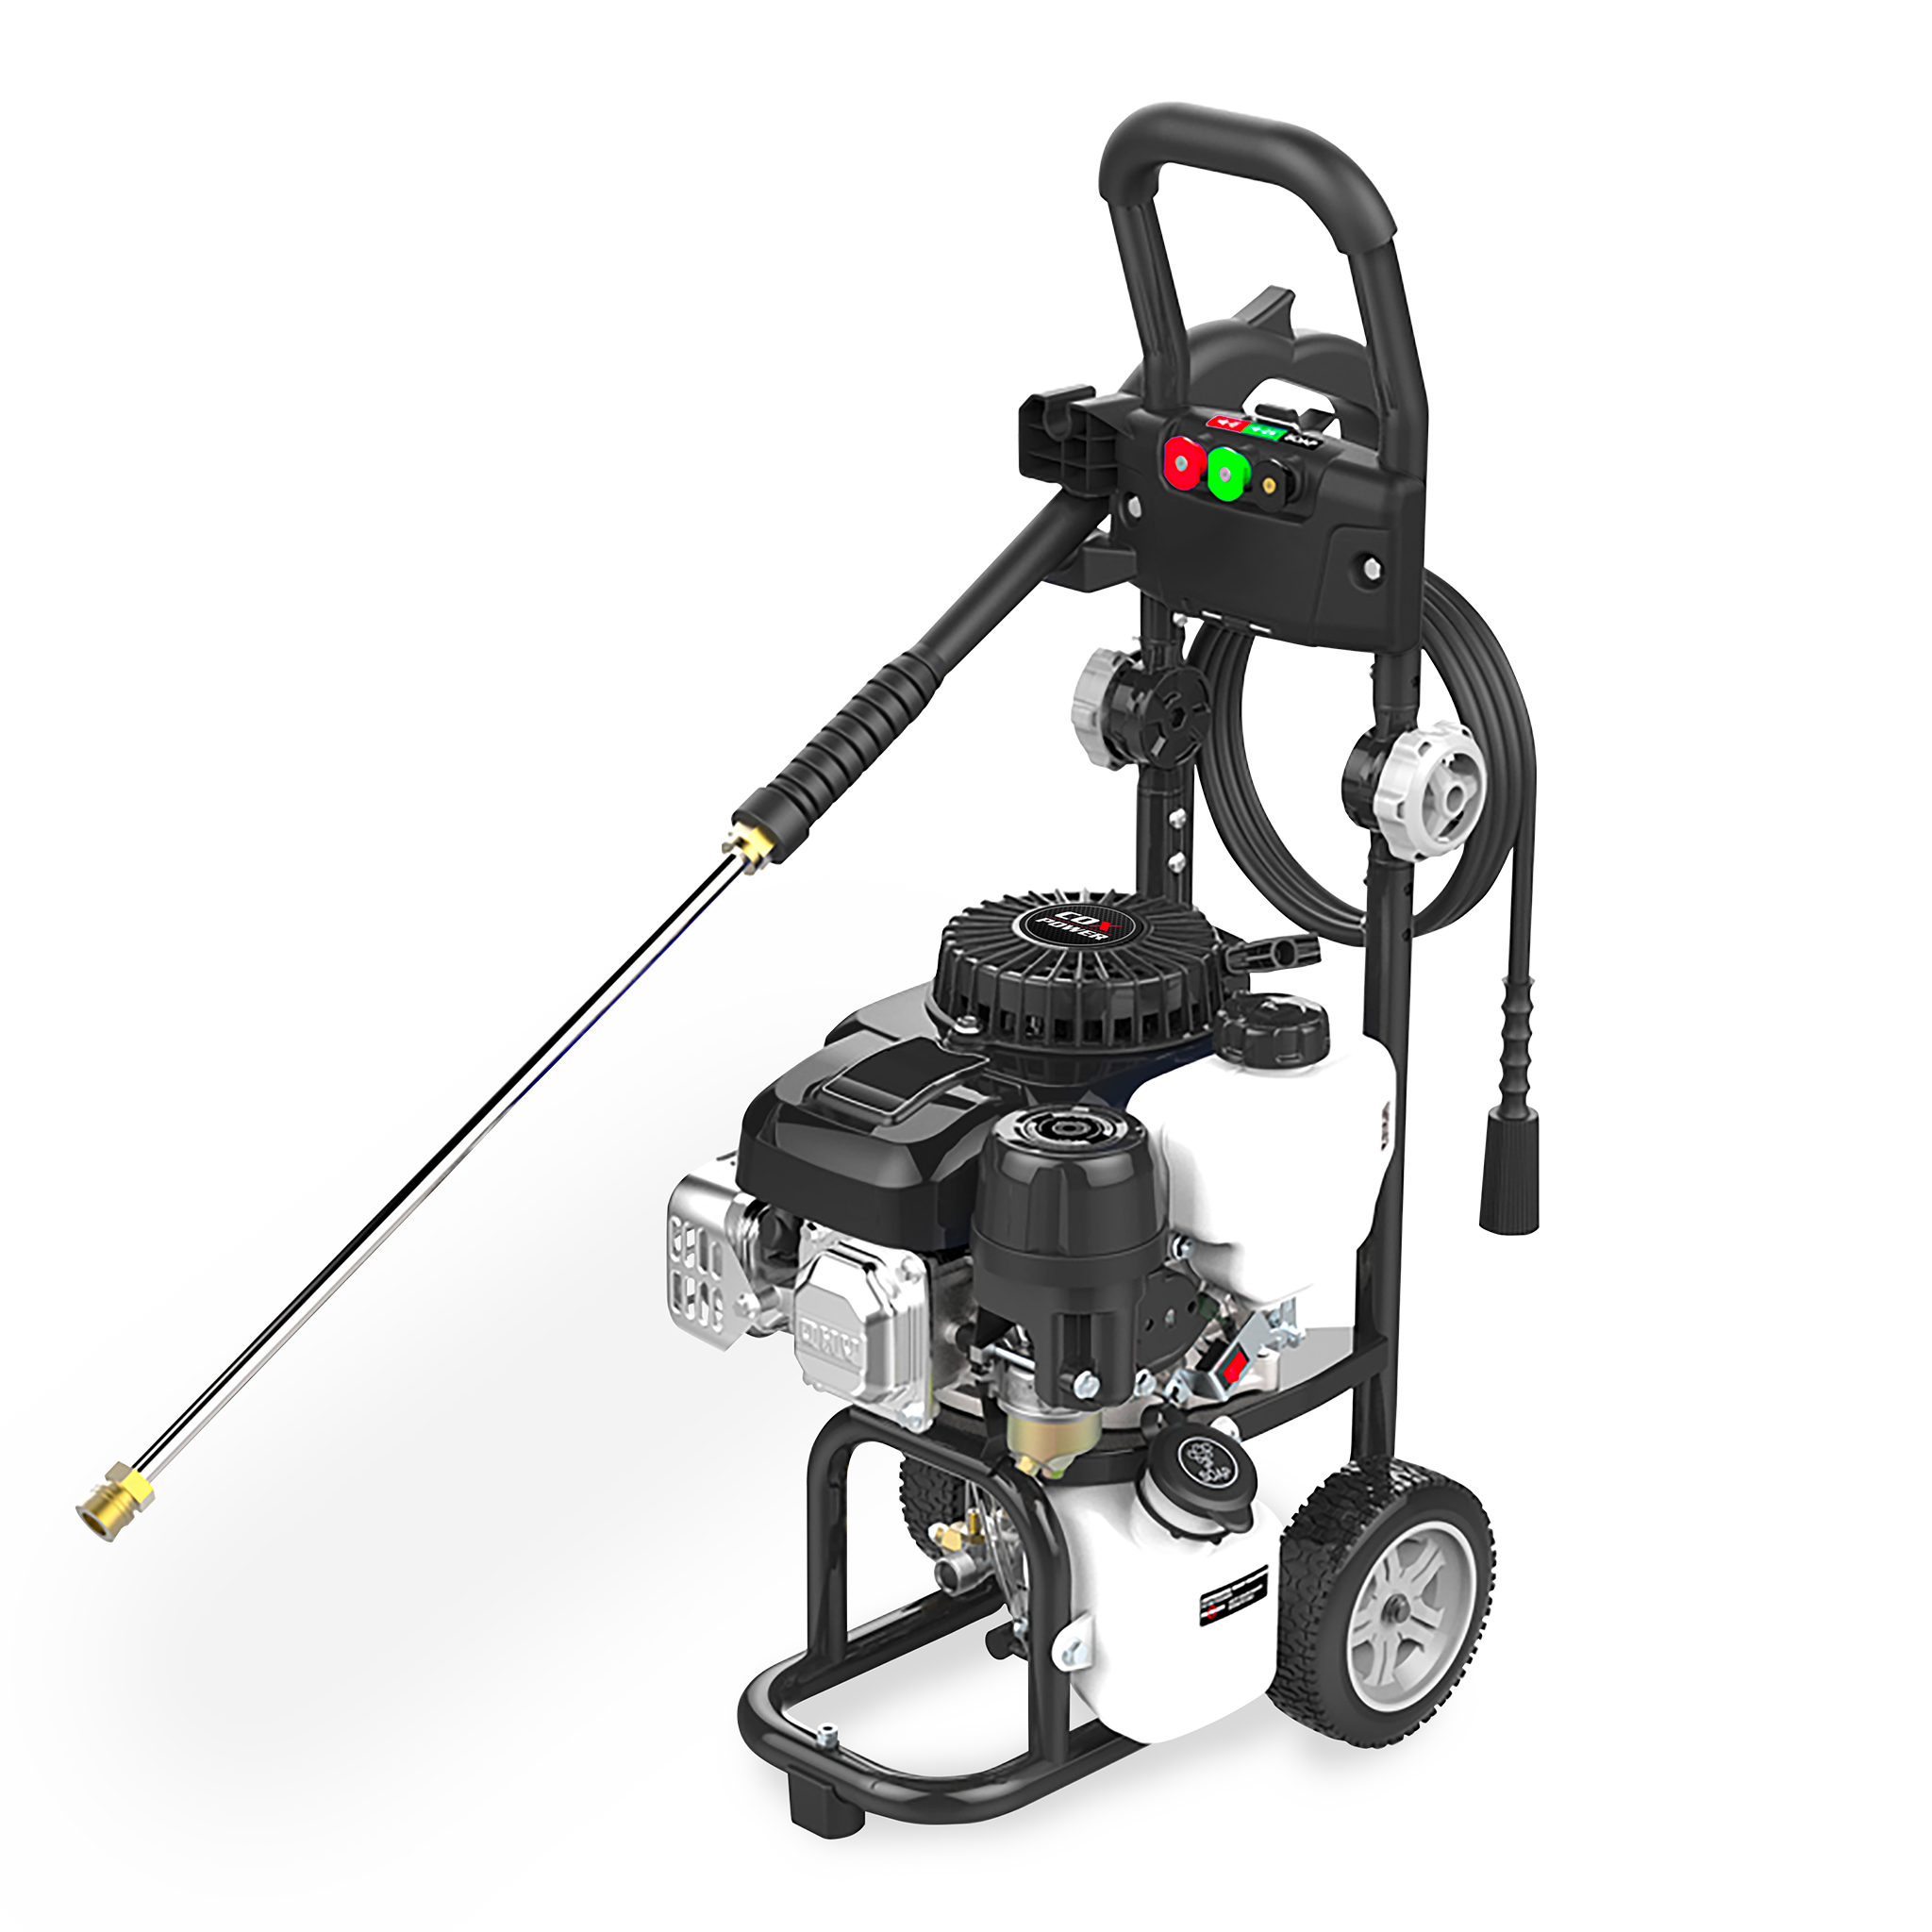 COX Power product image of a high pressure series pressure washer 2000psi